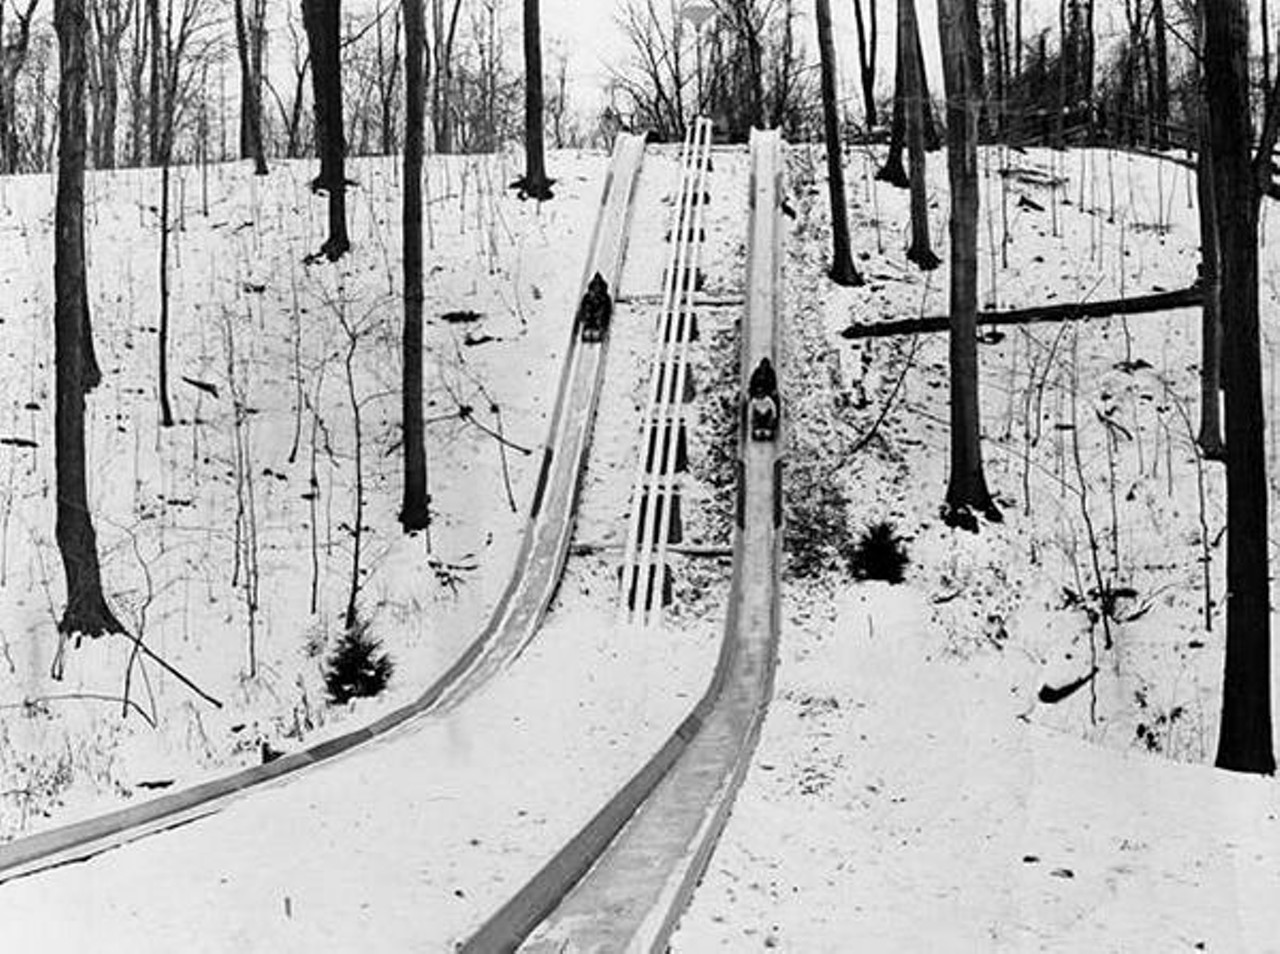  Toboggan at the Chalet
Winter! Screaming! Fun! If you want to toboggan, there's only one place to do so. You've skied, sledded and ice skated, but to properly round out the winter sporting experience, slide down a chute of ice while the cold air blasts your face.
Photo via Scene Archives